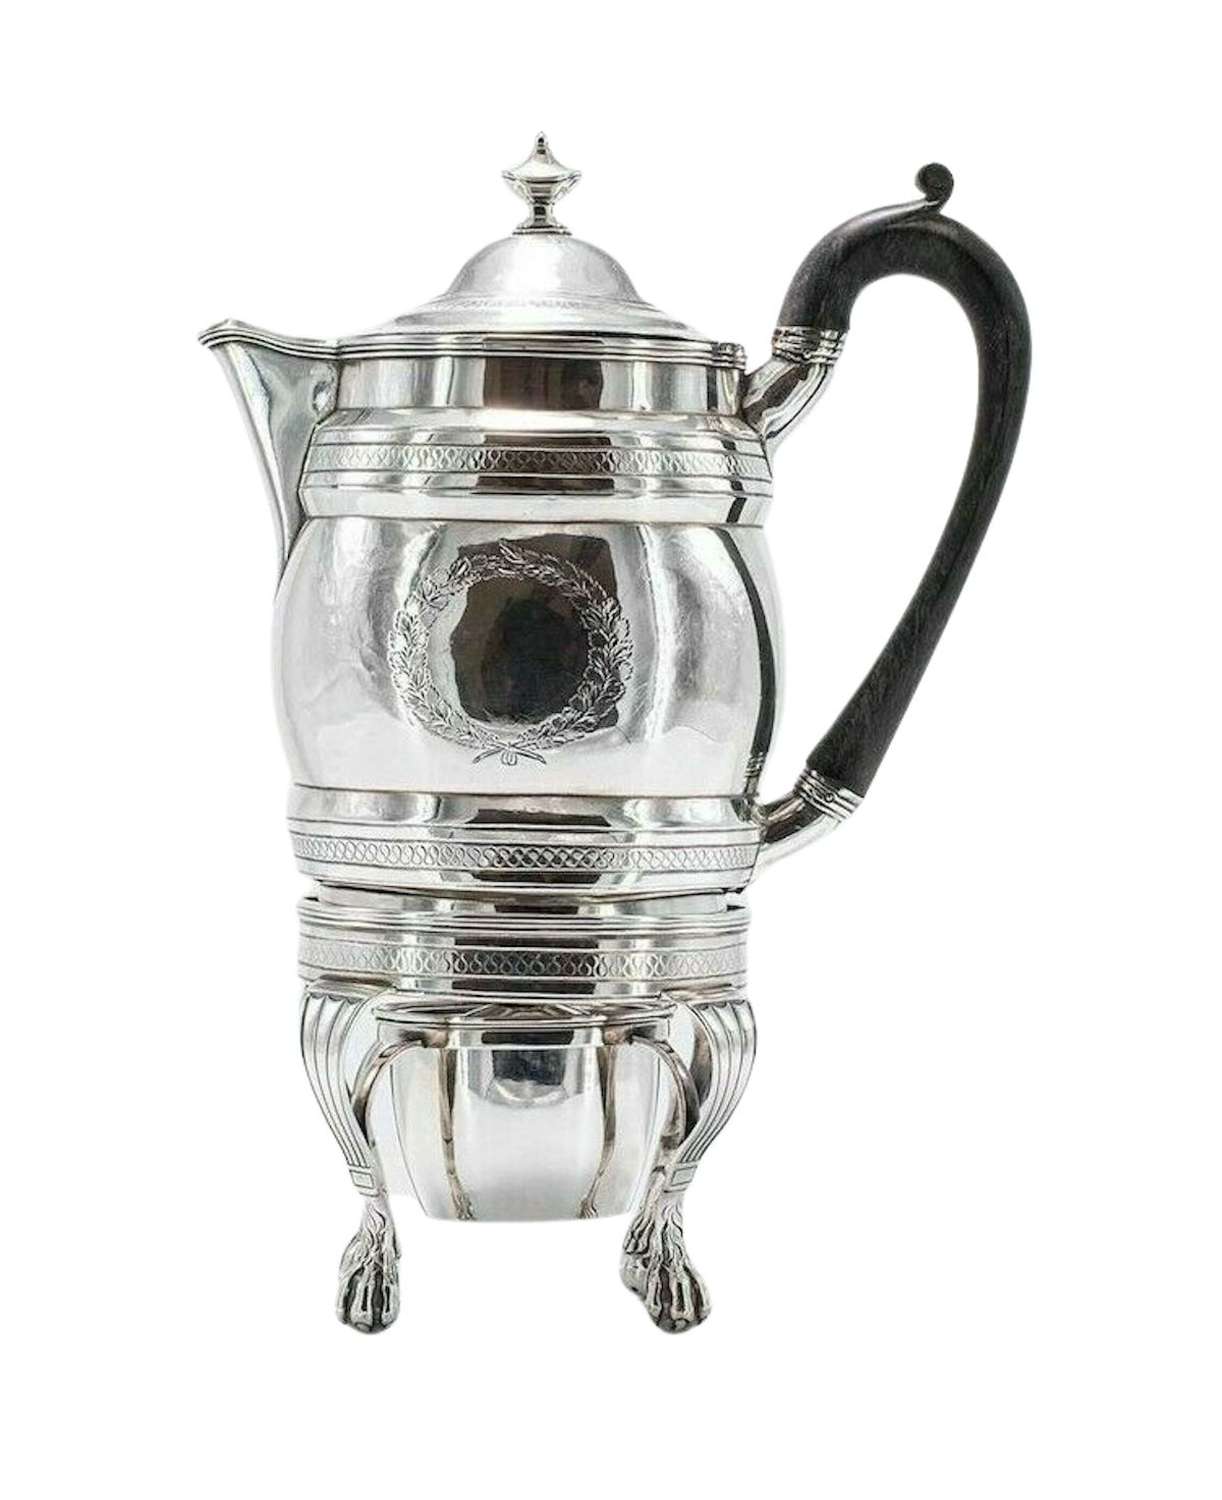 1799 Georgian Antique Solid Silver Coffee Pot & Burner on Stand